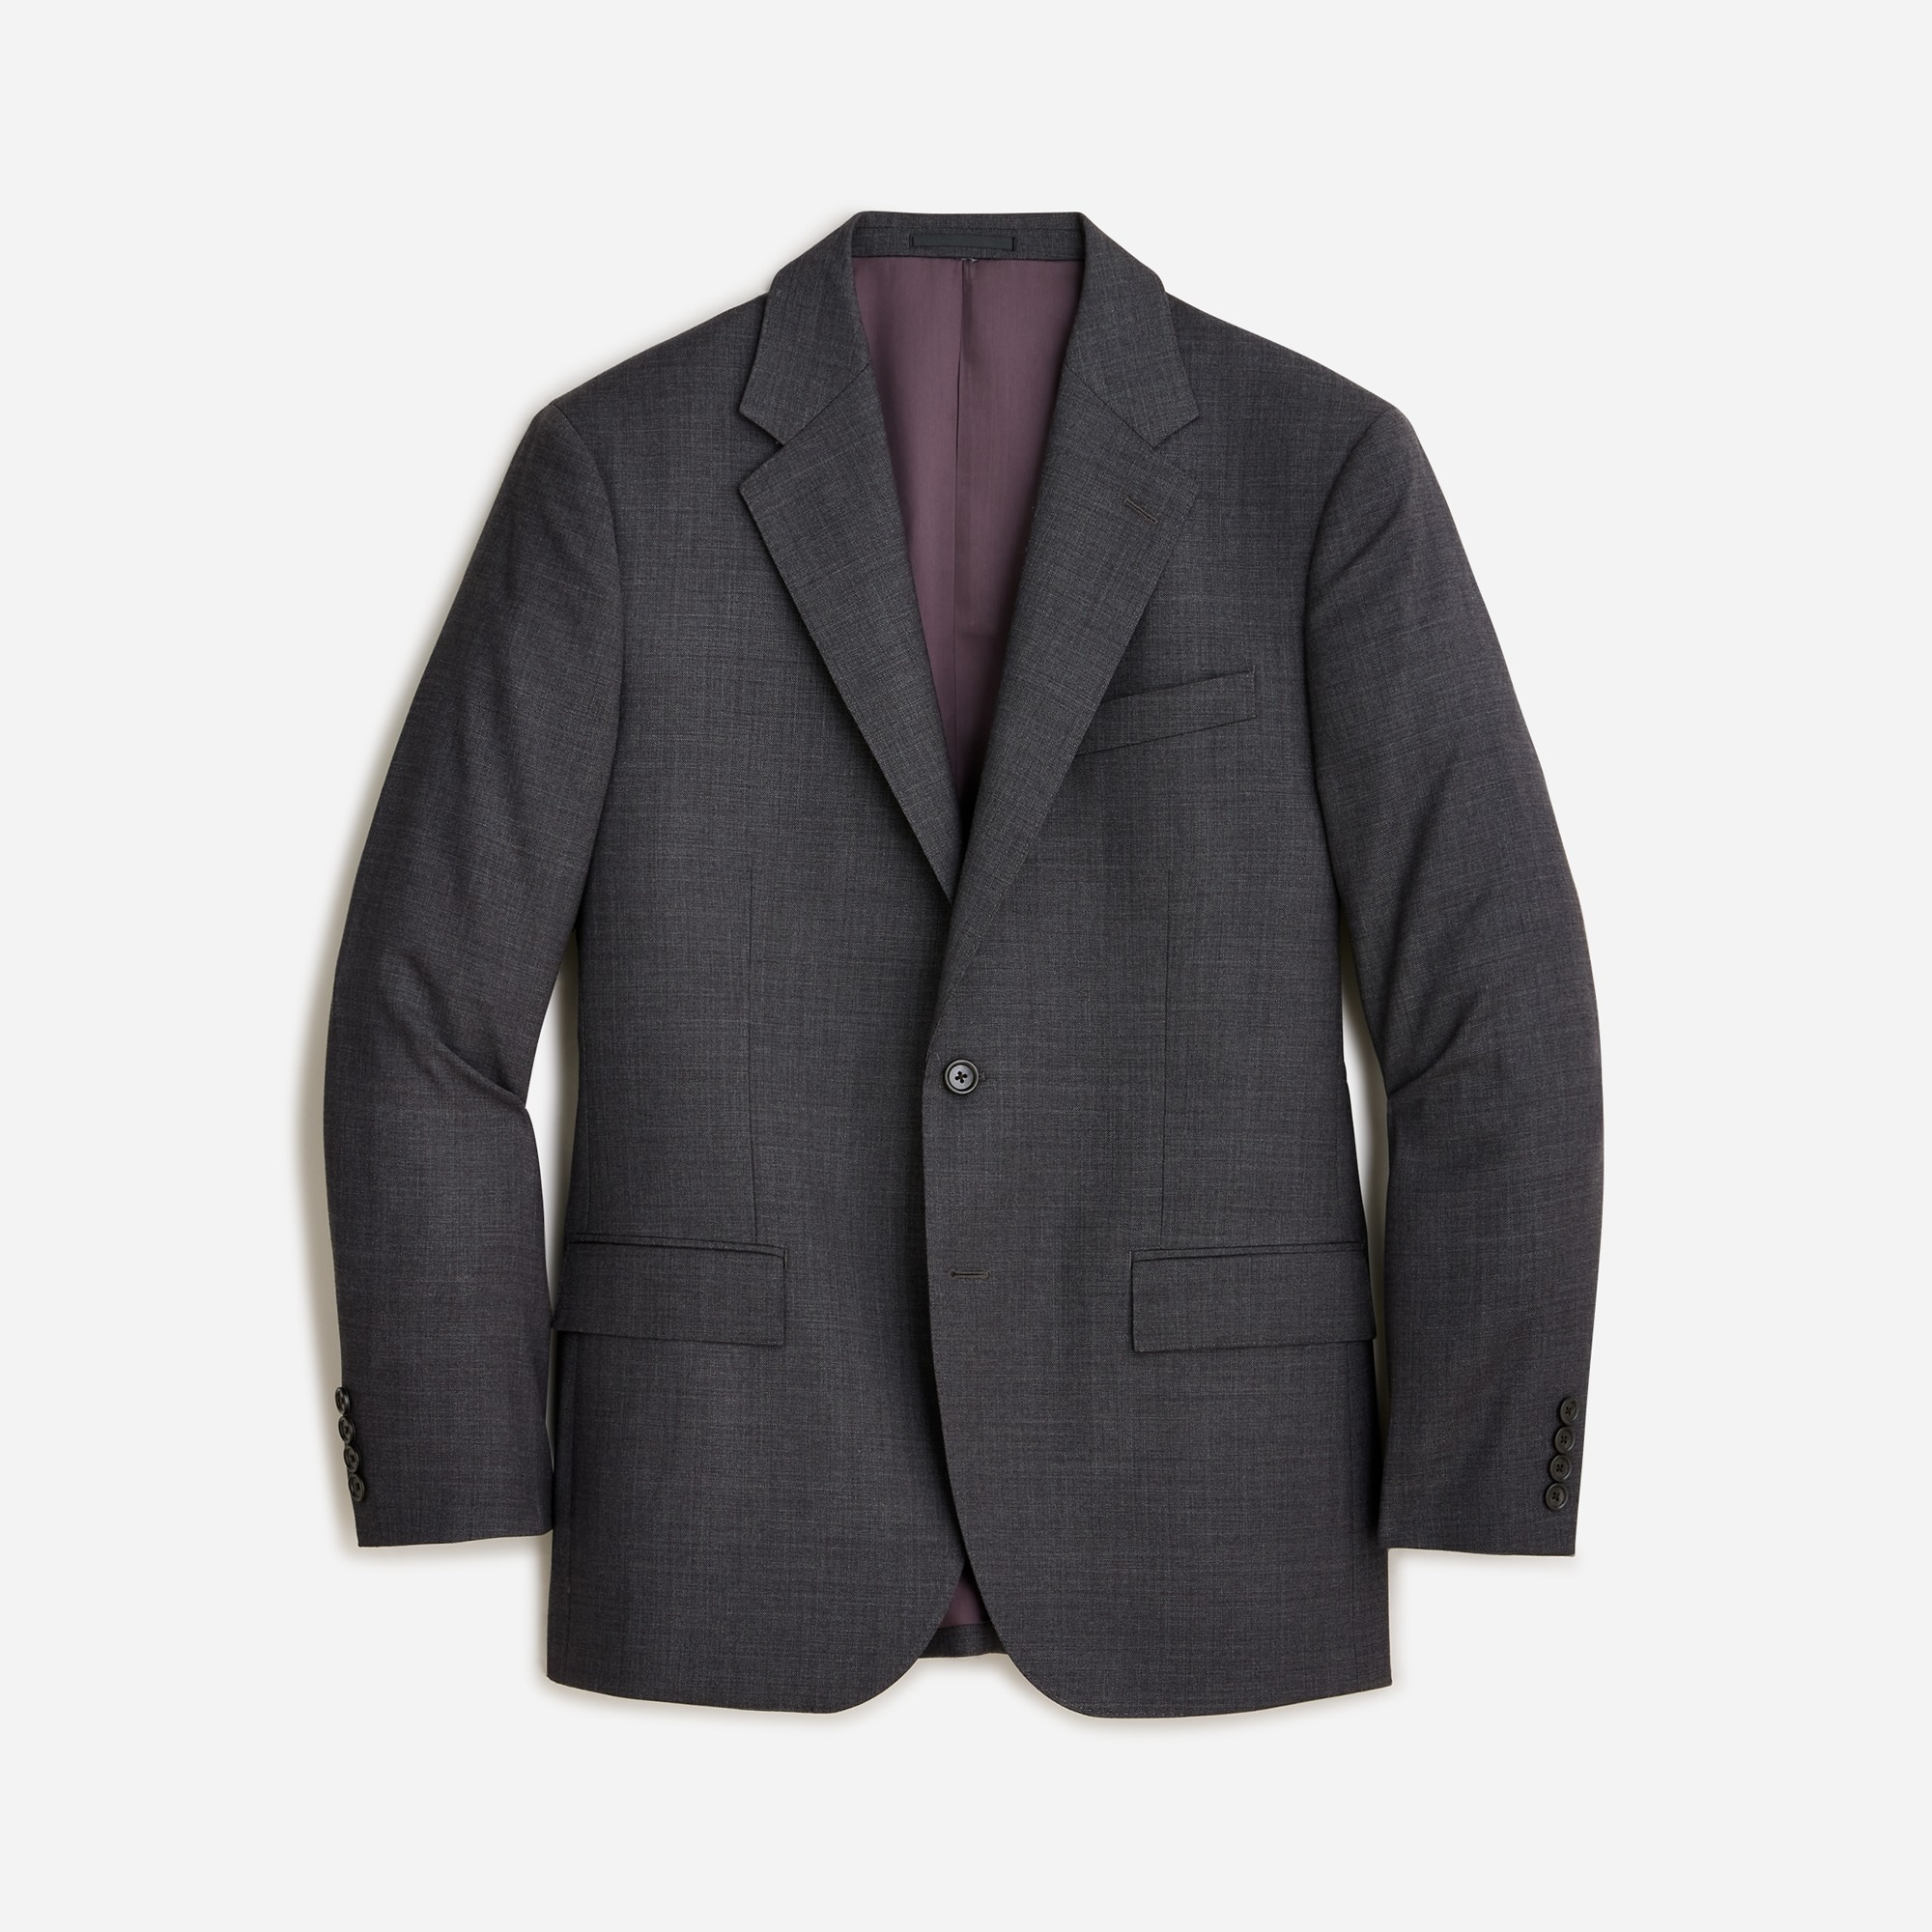  Crosby Classic-fit suit jacket in Italian stretch worsted wool blend